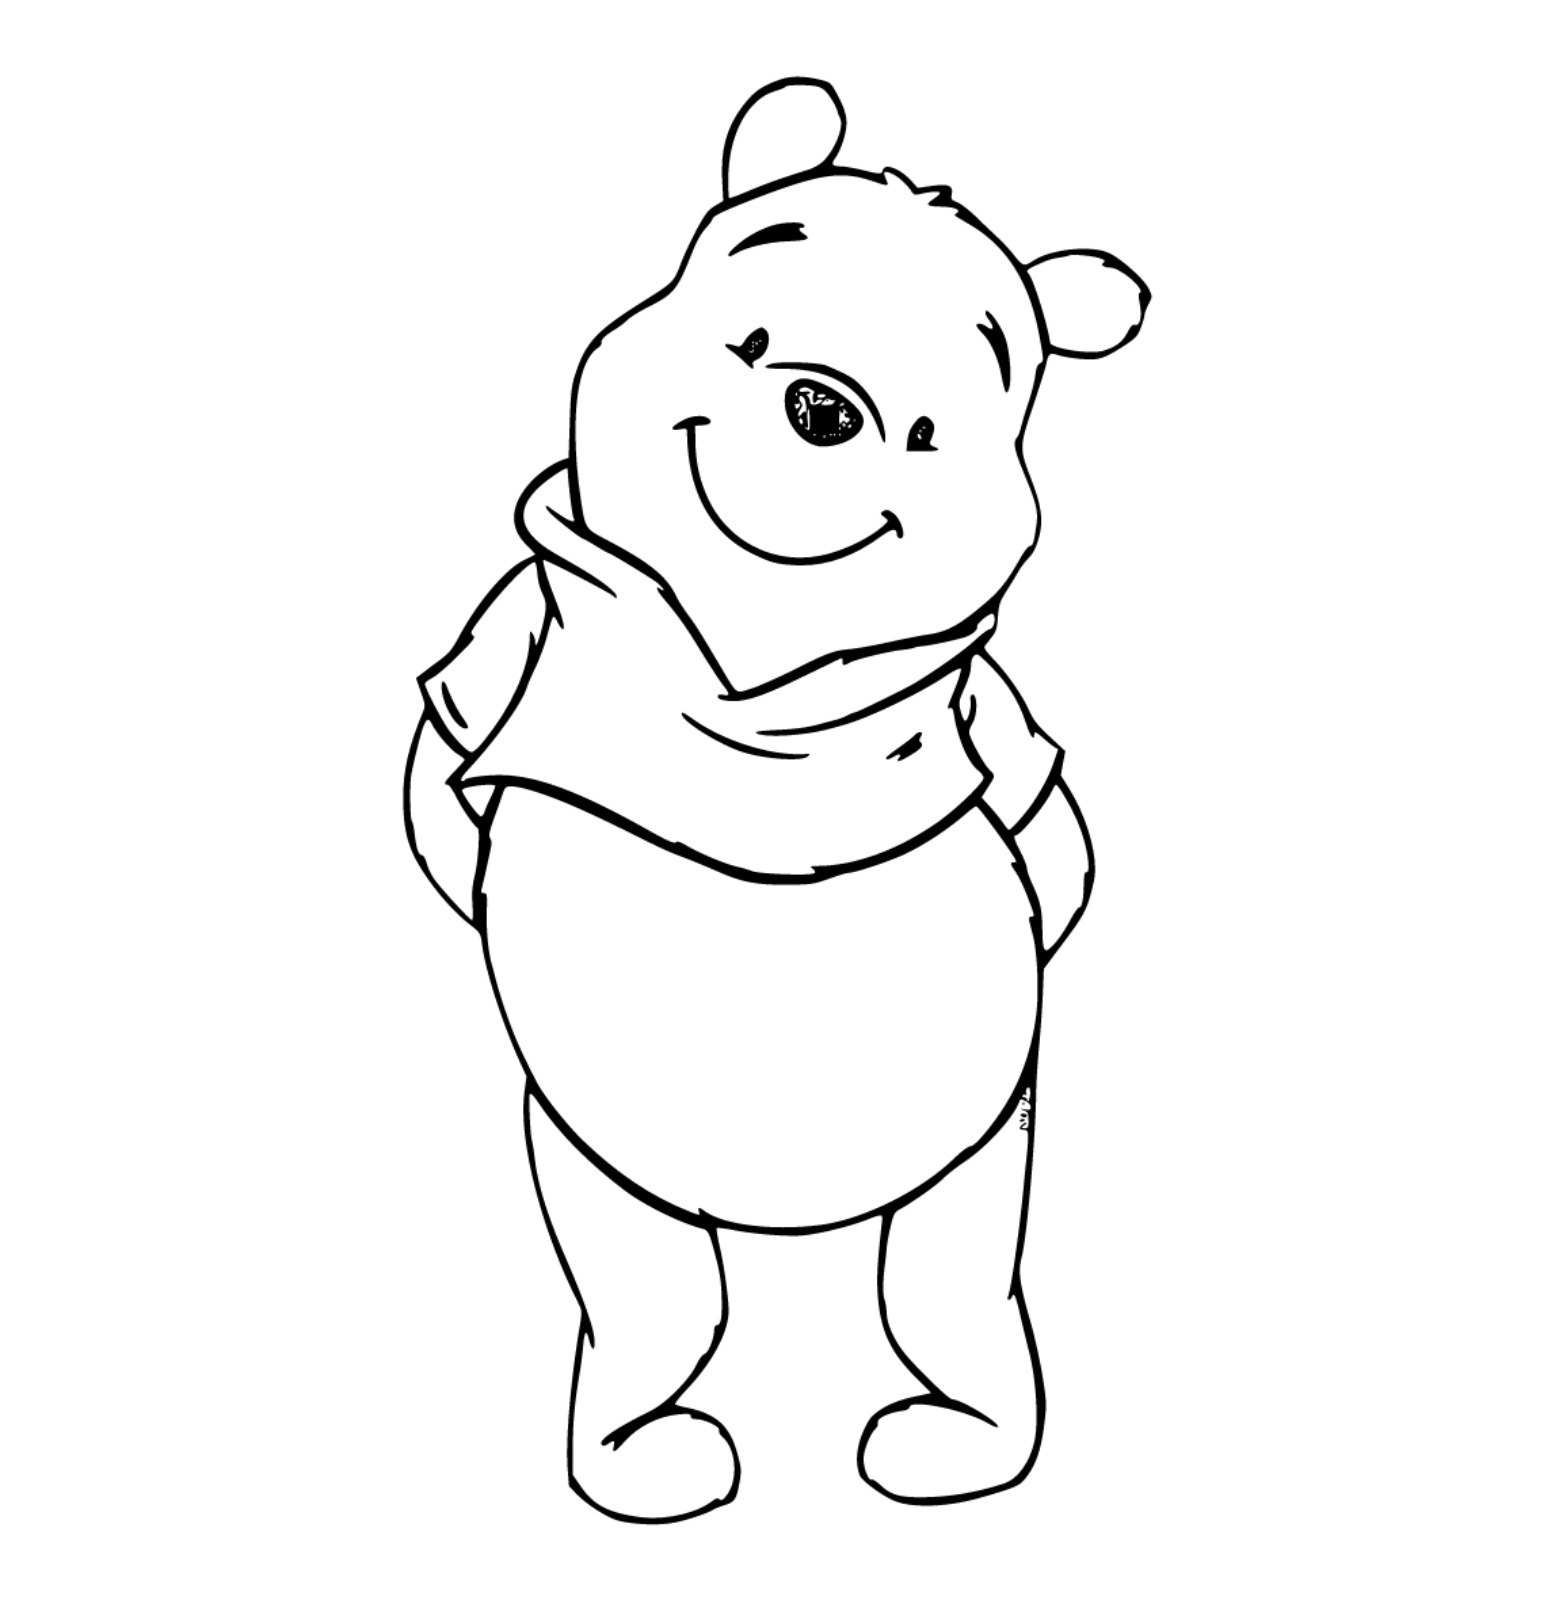 Printable Cute Winnie the Pooh Coloring Page for kids.